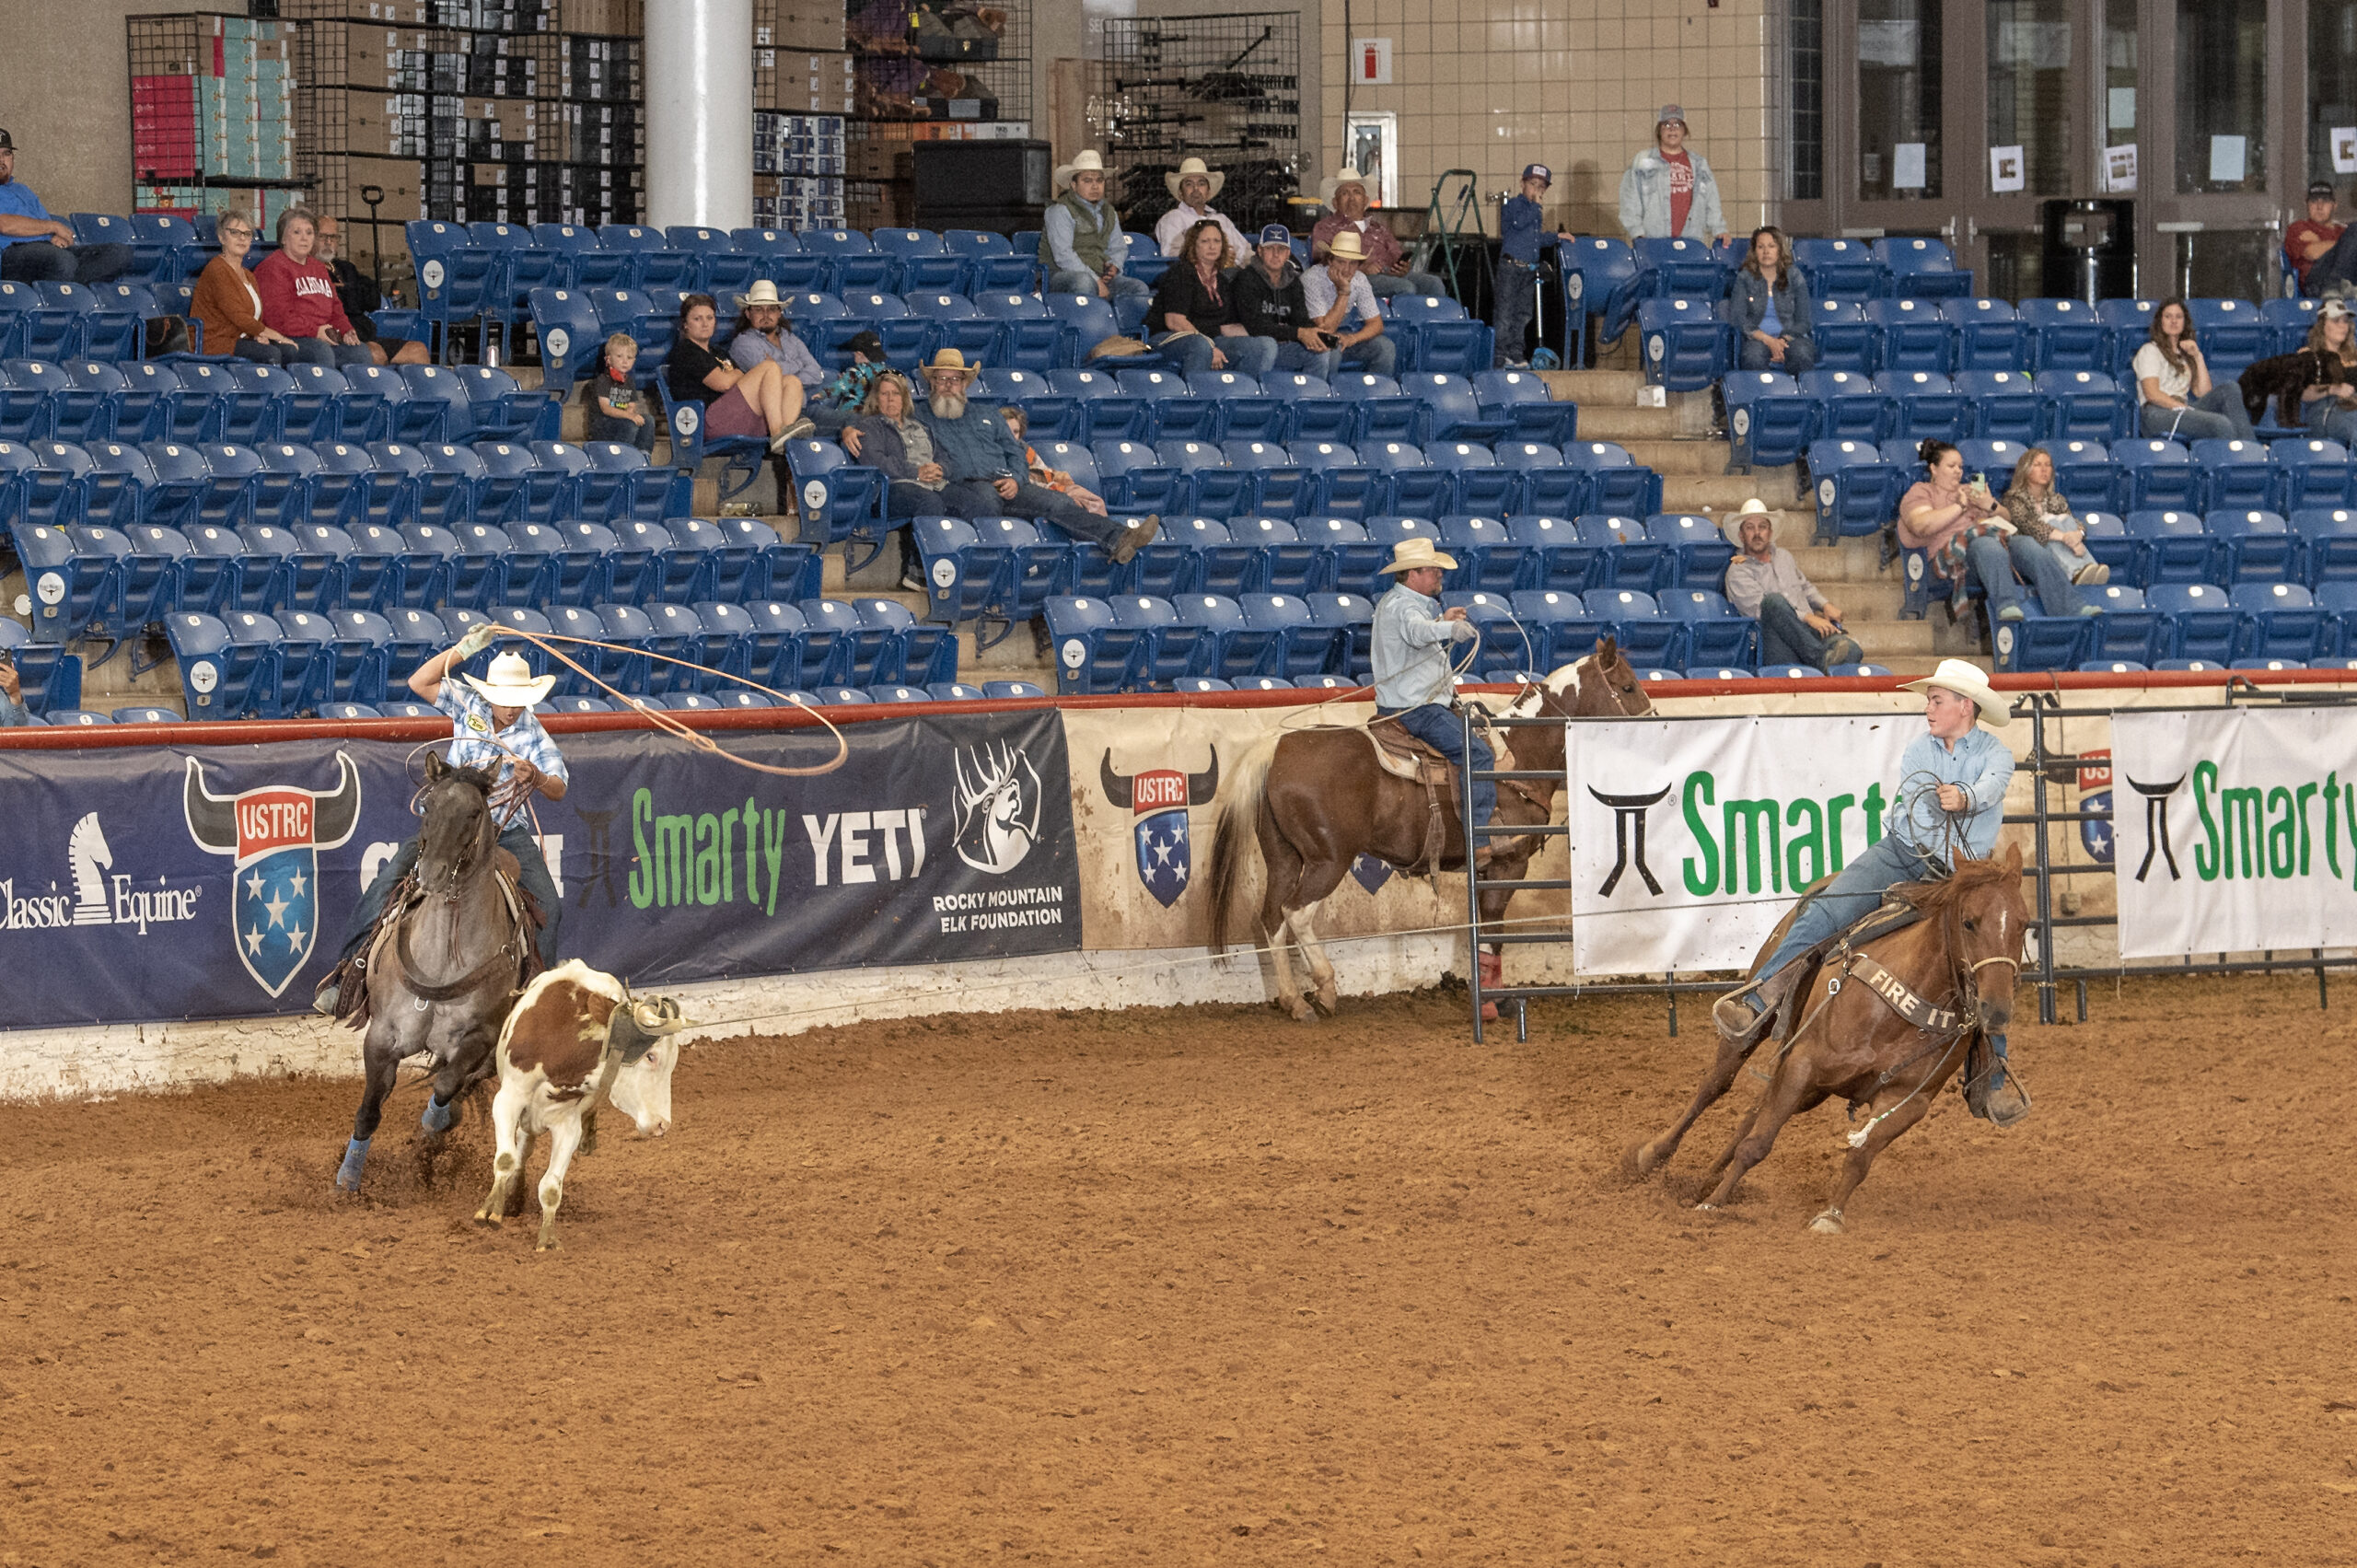 Beck Perkins and Kameron Loud roping a steer in the Smarty #7 Championships.